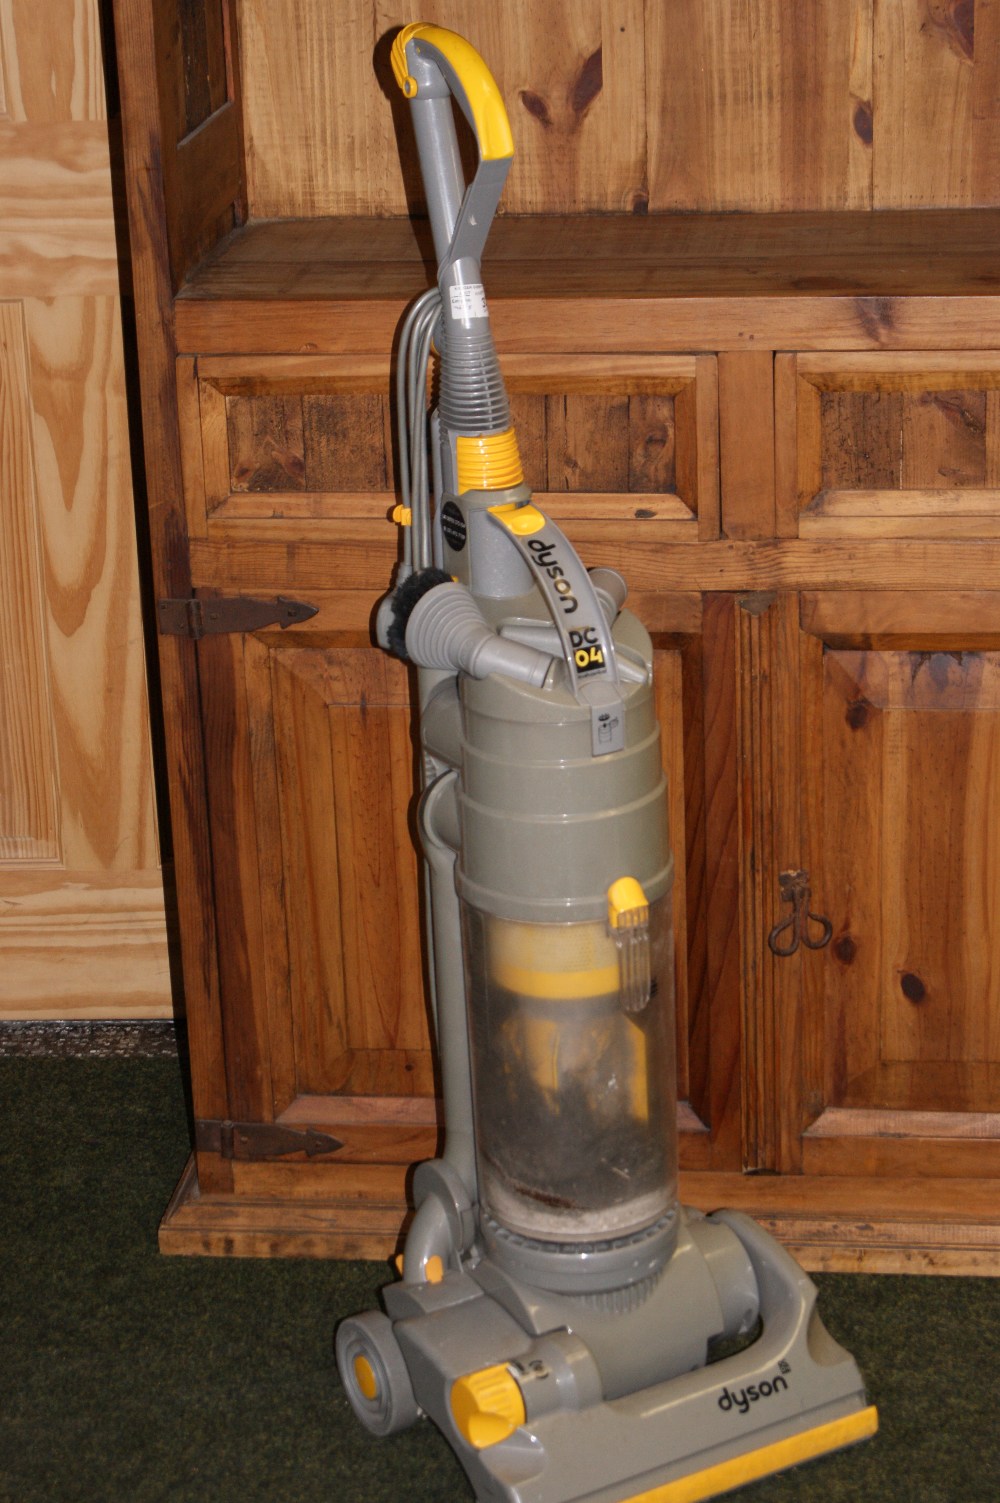 Dyson upright vacuum cleaner (not tested)